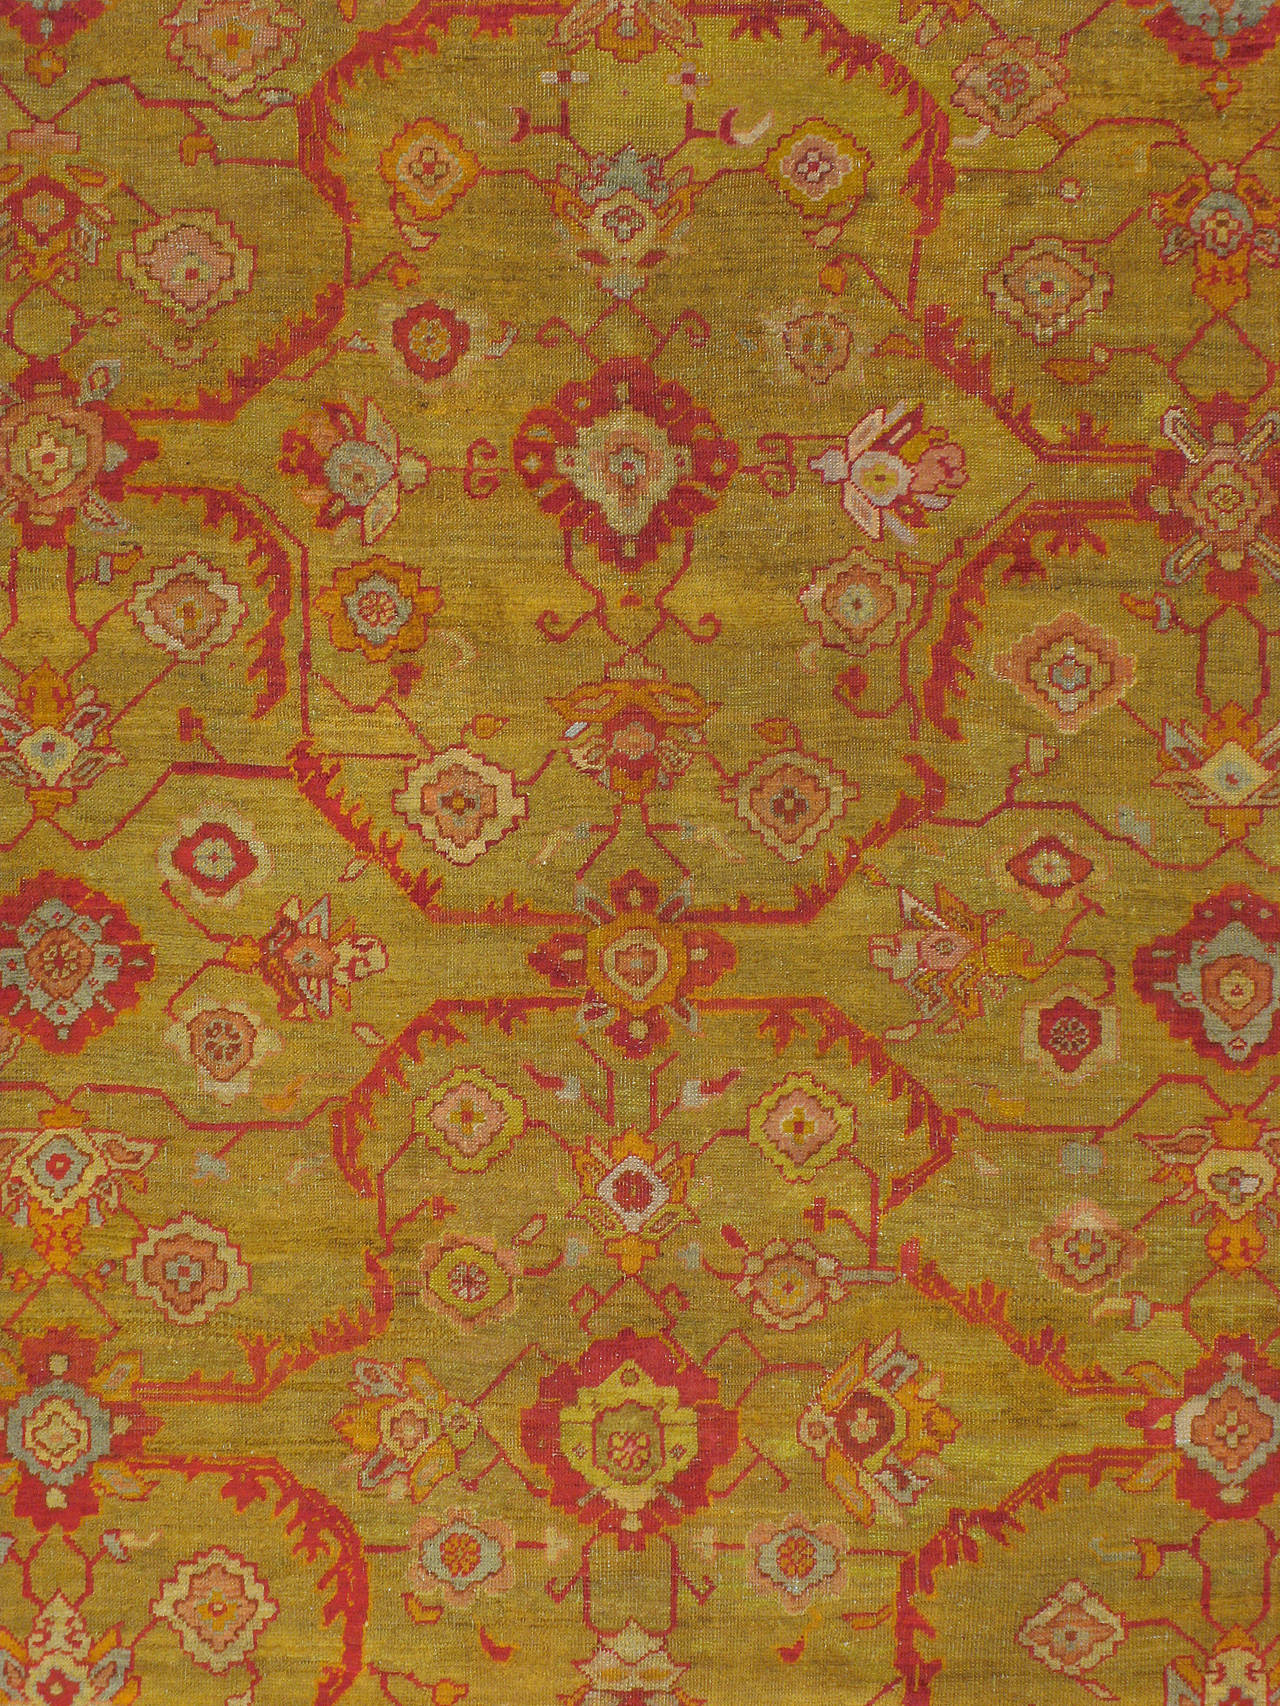 A vintage Turkish Oushak carpet from the second quarter of the 20th century in acid green, 10' x 13' room size rug.

Measures: 10' 8